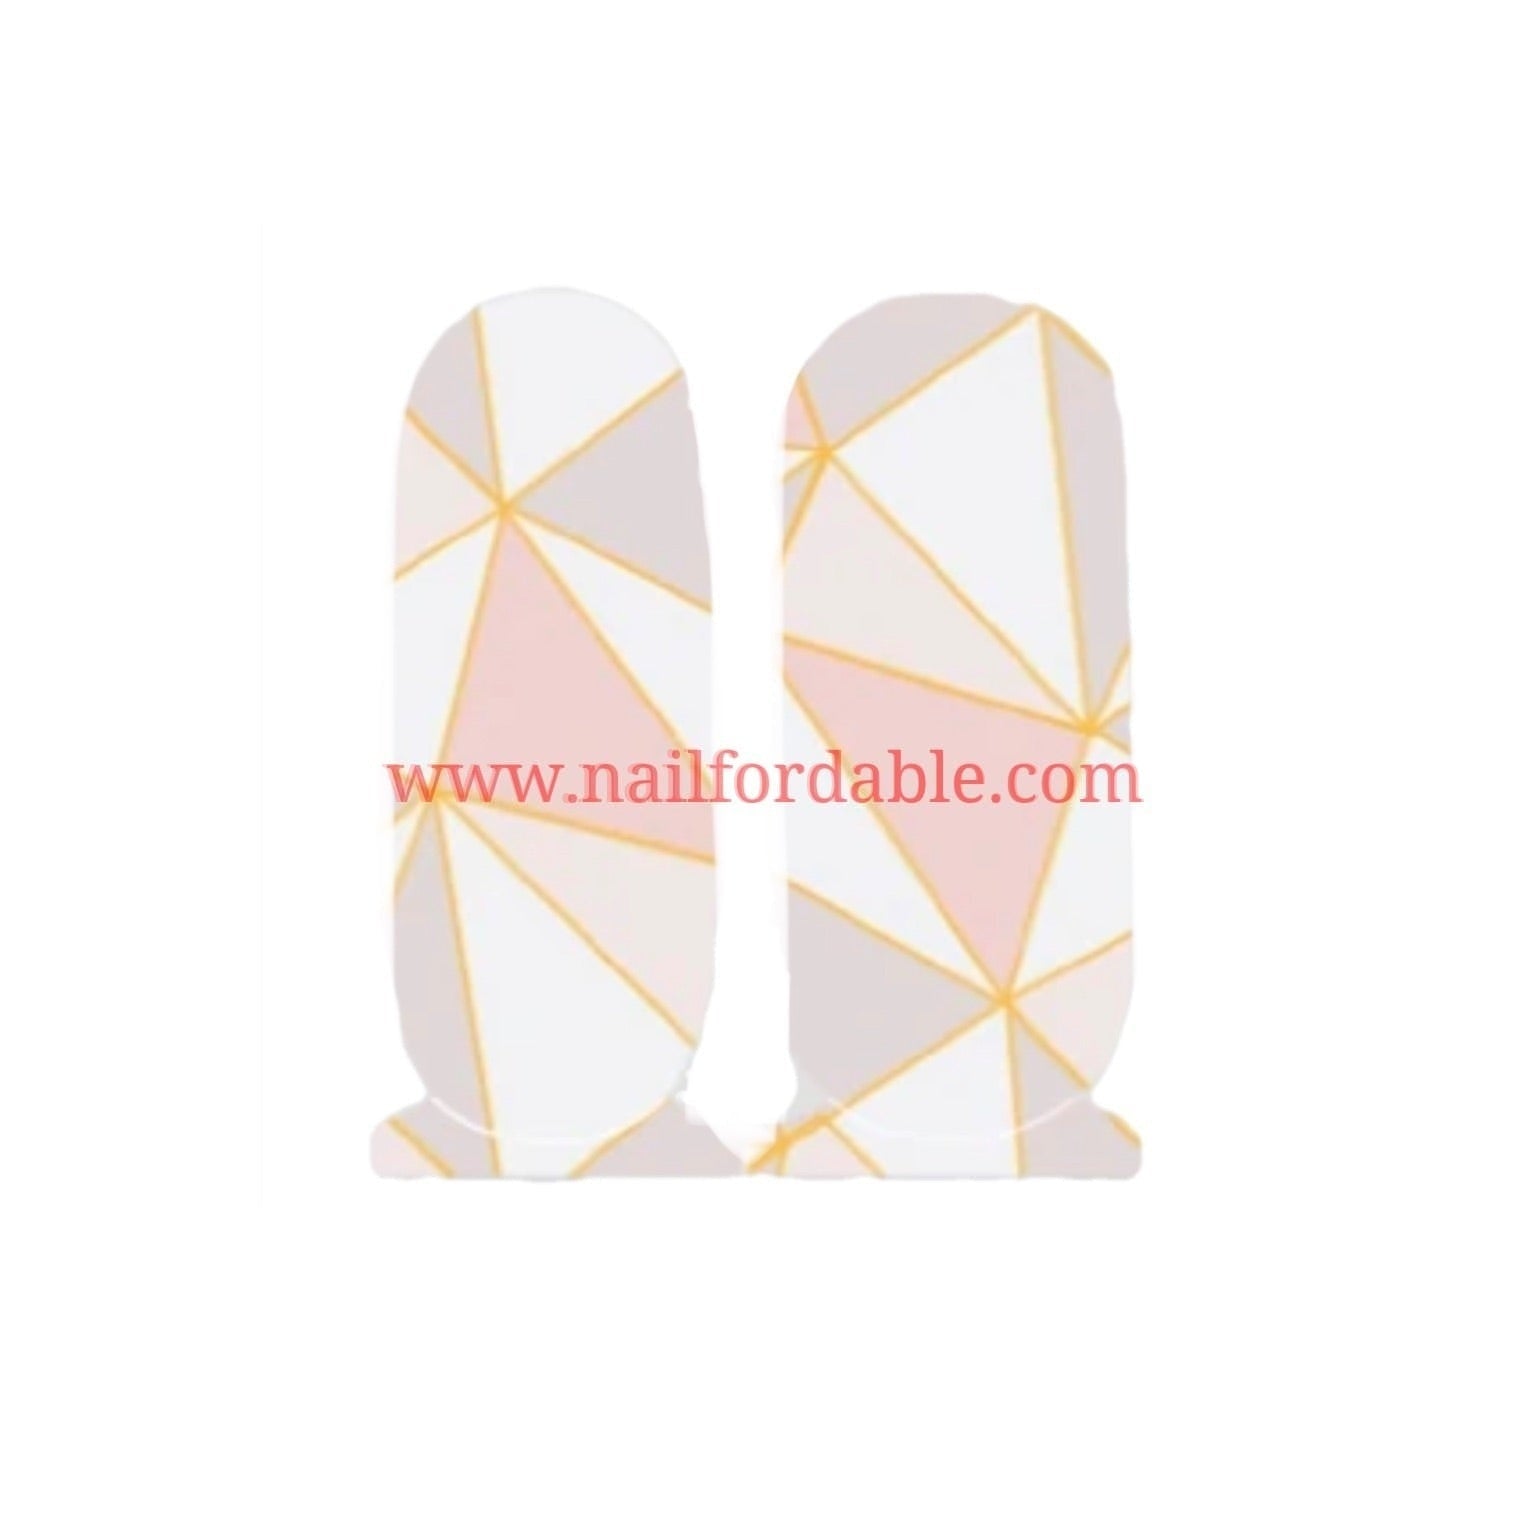 Triangles Accents Nail Wraps | Semi Cured Gel Wraps | Gel Nail Wraps |Nail Polish | Nail Stickers